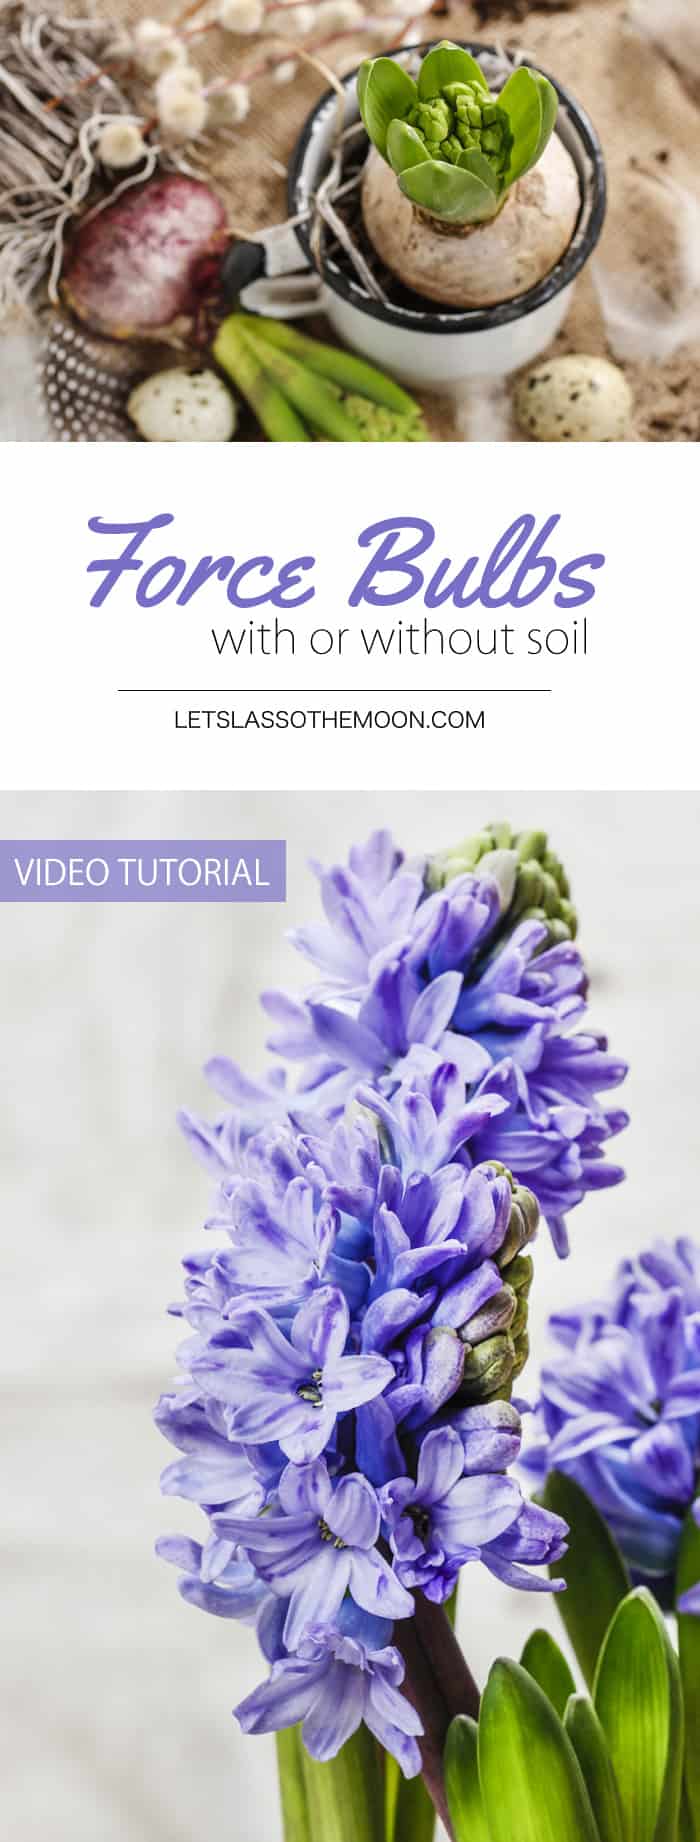 How to Force Bulbs With or Without Soil *So pretty. Saving this video tutorial for later.